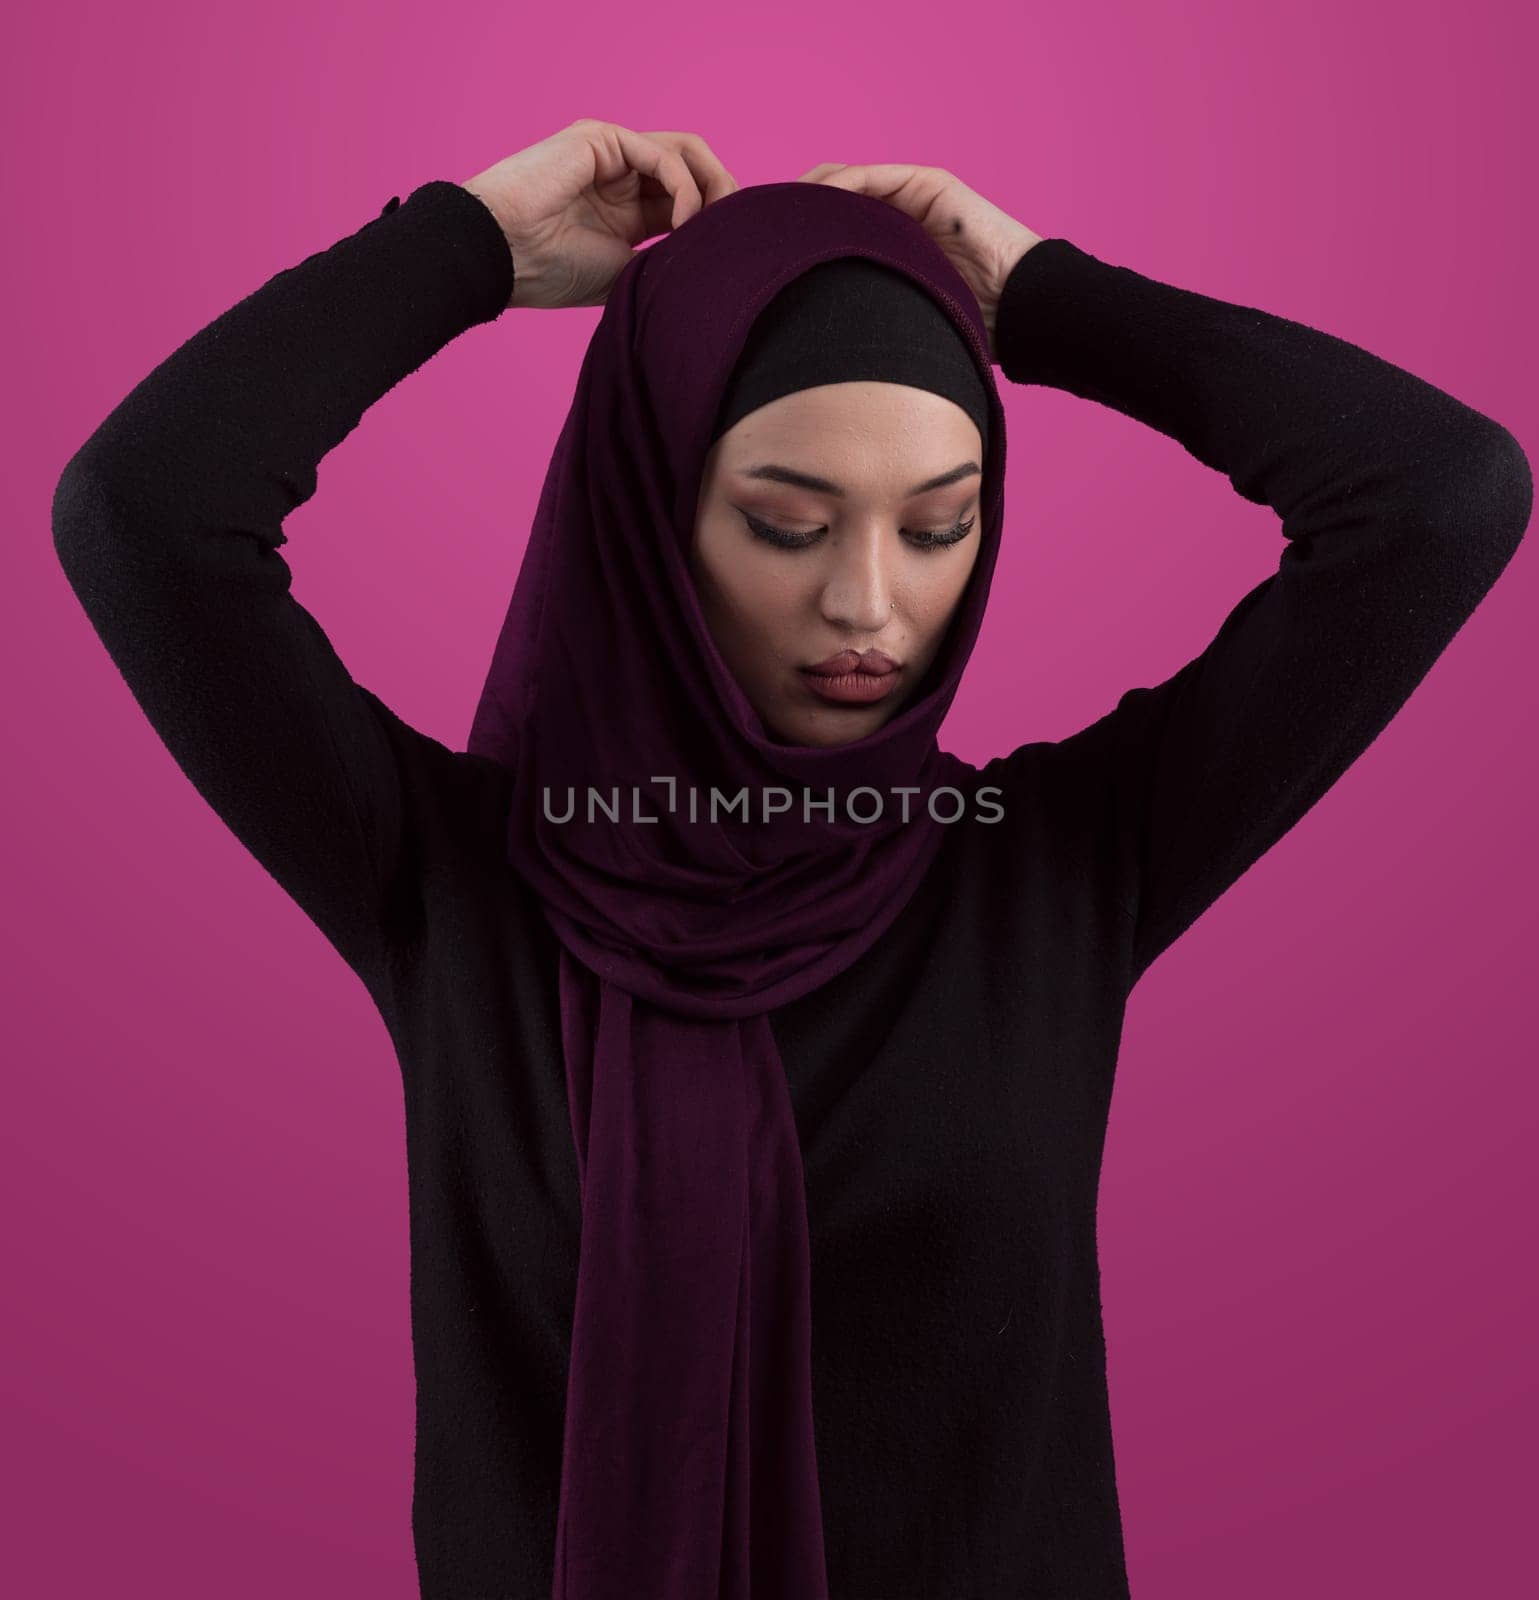 Modern Muslim woman wearing stylish hijab casual wear isolated on pink background. Diverse people model hijab fashion concept. by dotshock